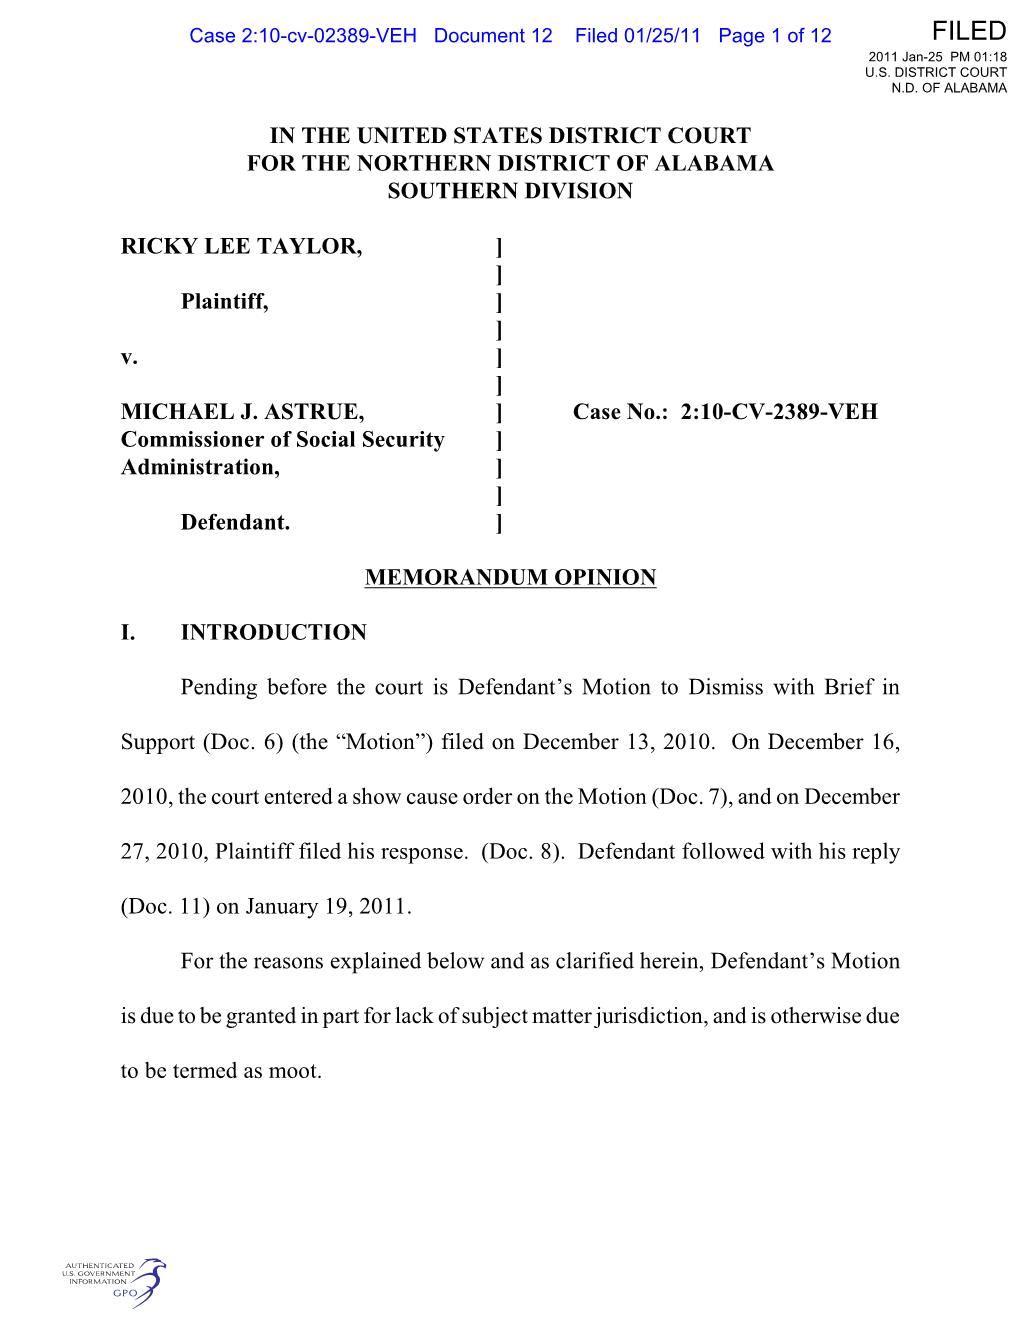 In the United States District Court for the Northern District of Alabama Southern Division